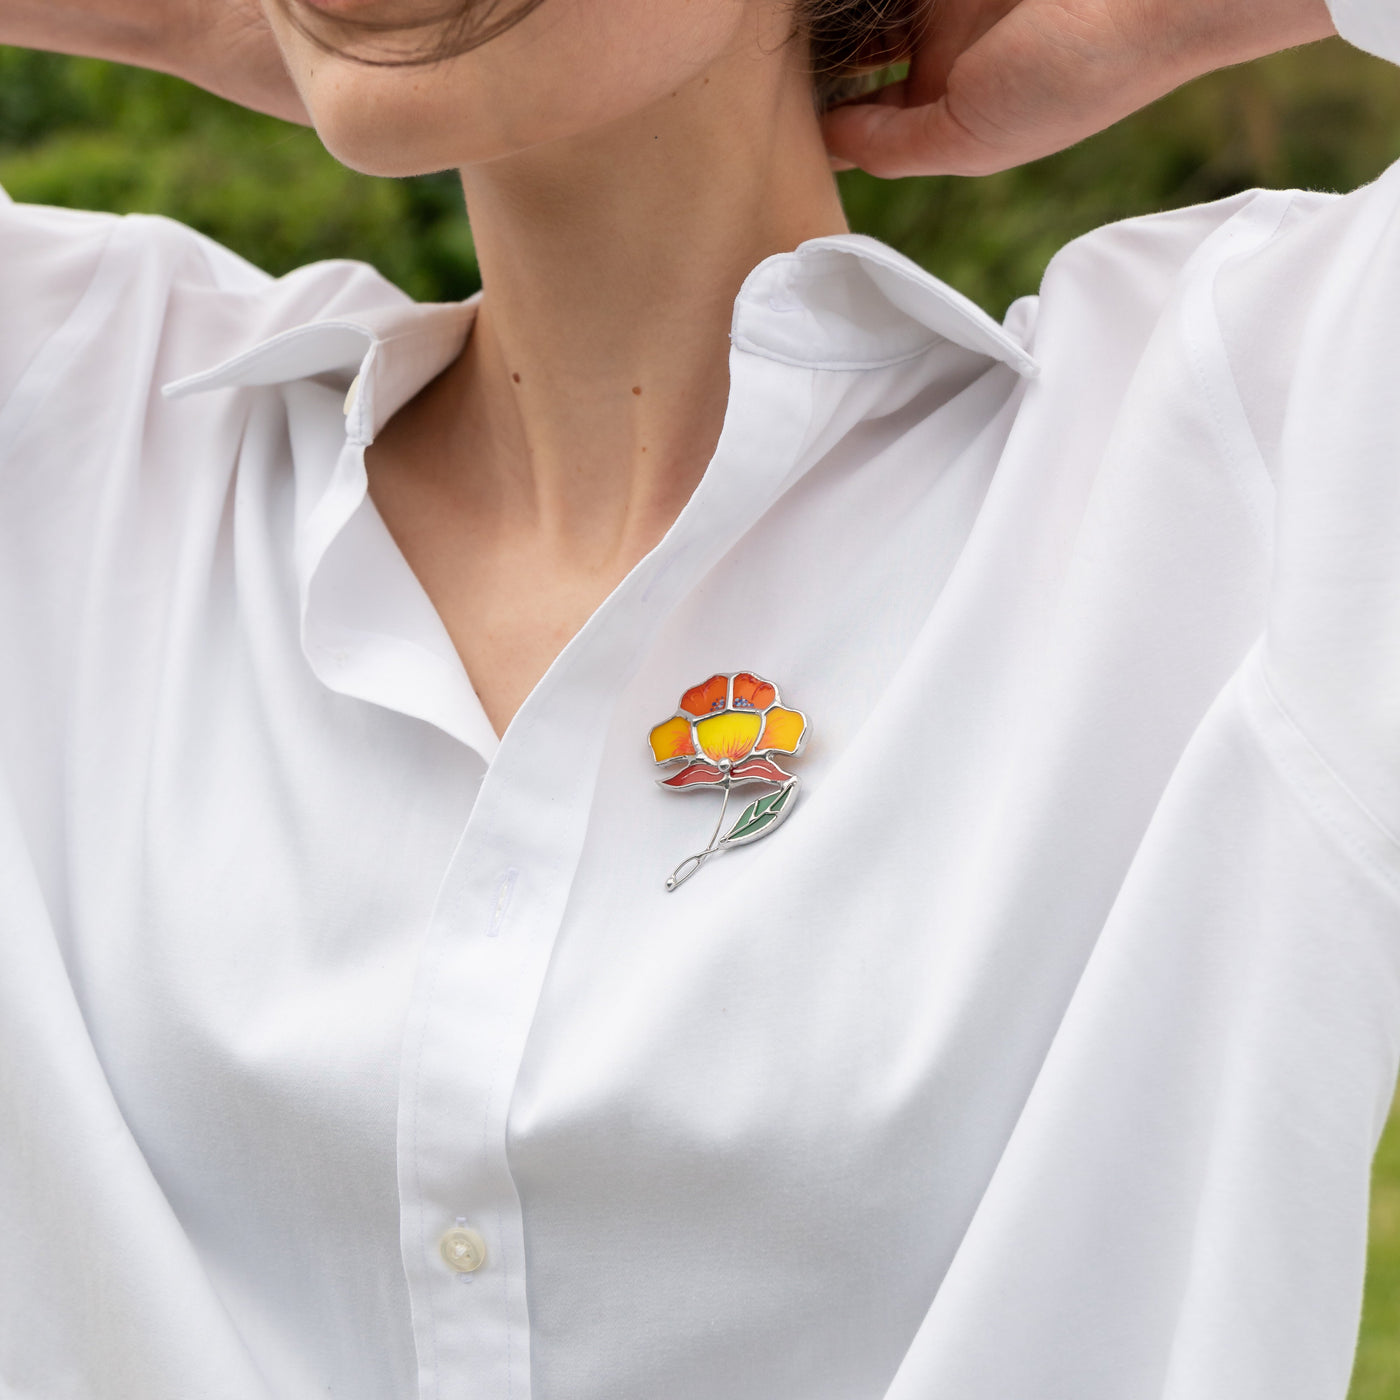 Stained glass peony pin on a white shirt